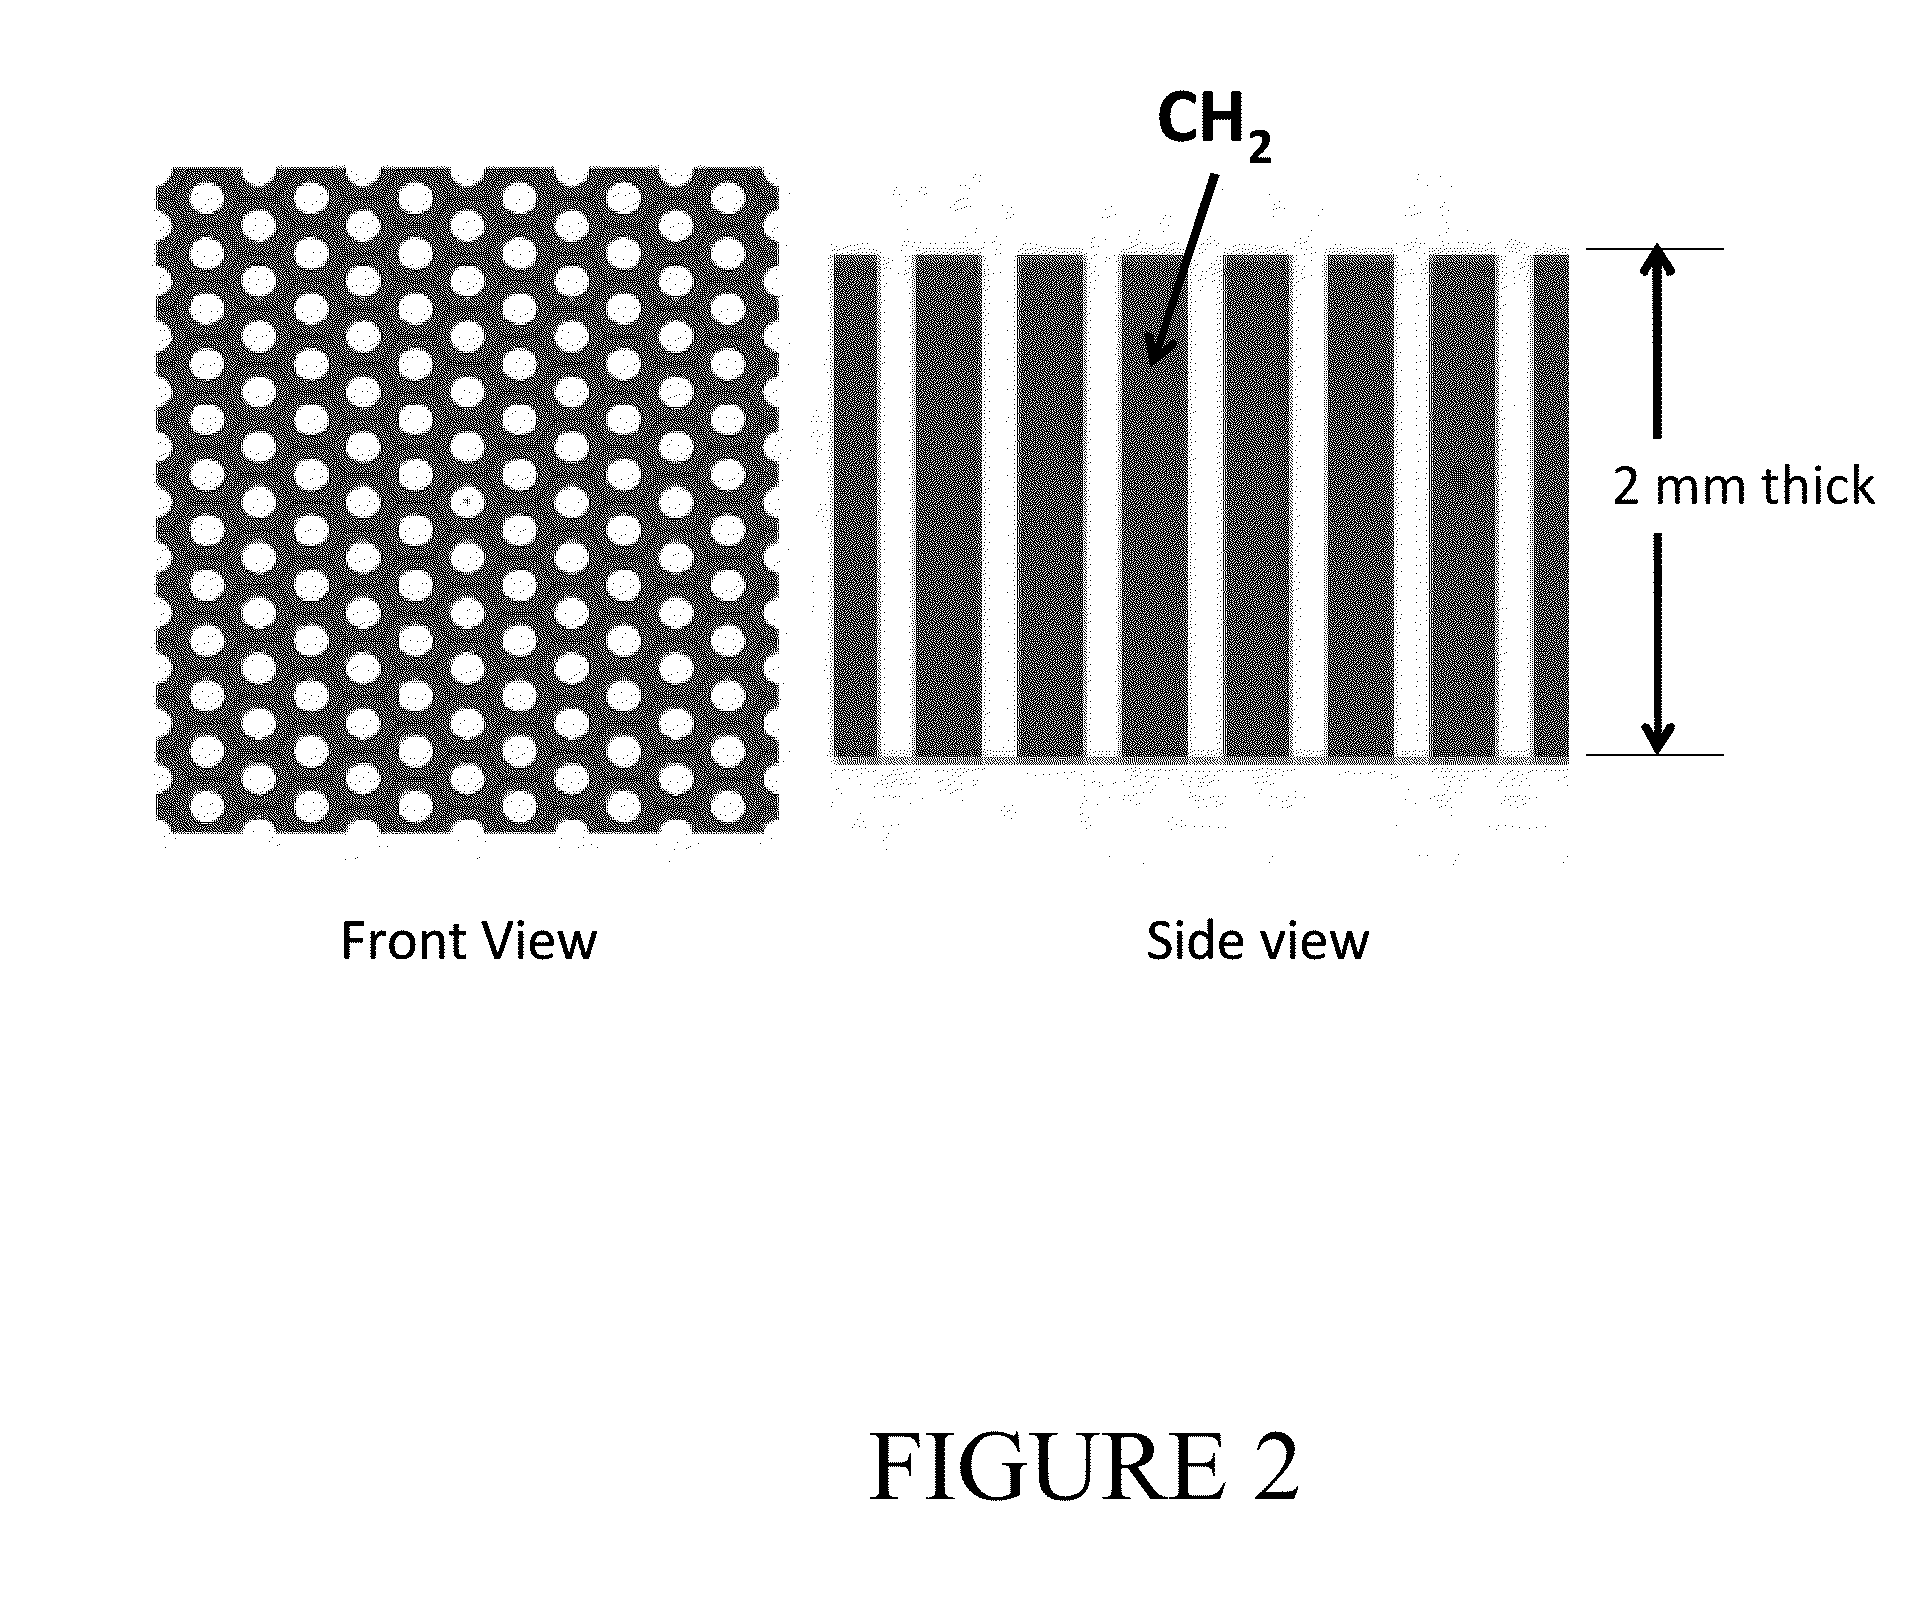 Fast neutron detector having an open-structured hydrogenous radiator